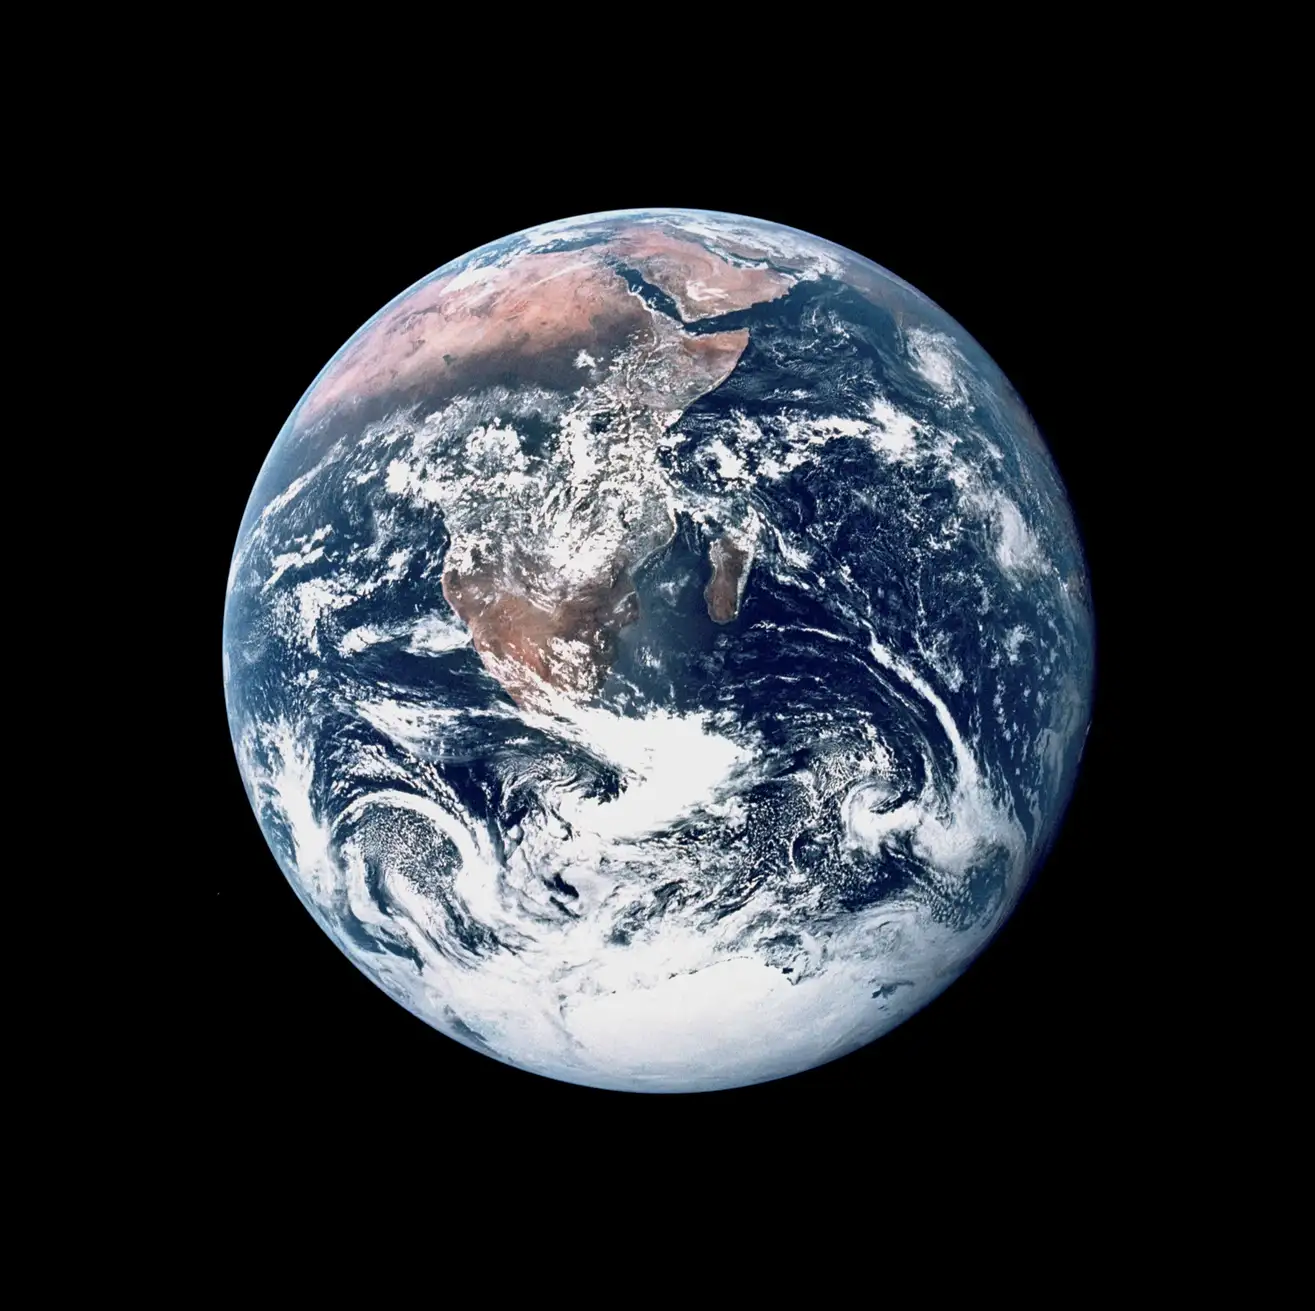 Photo of the whole earth made in 1972